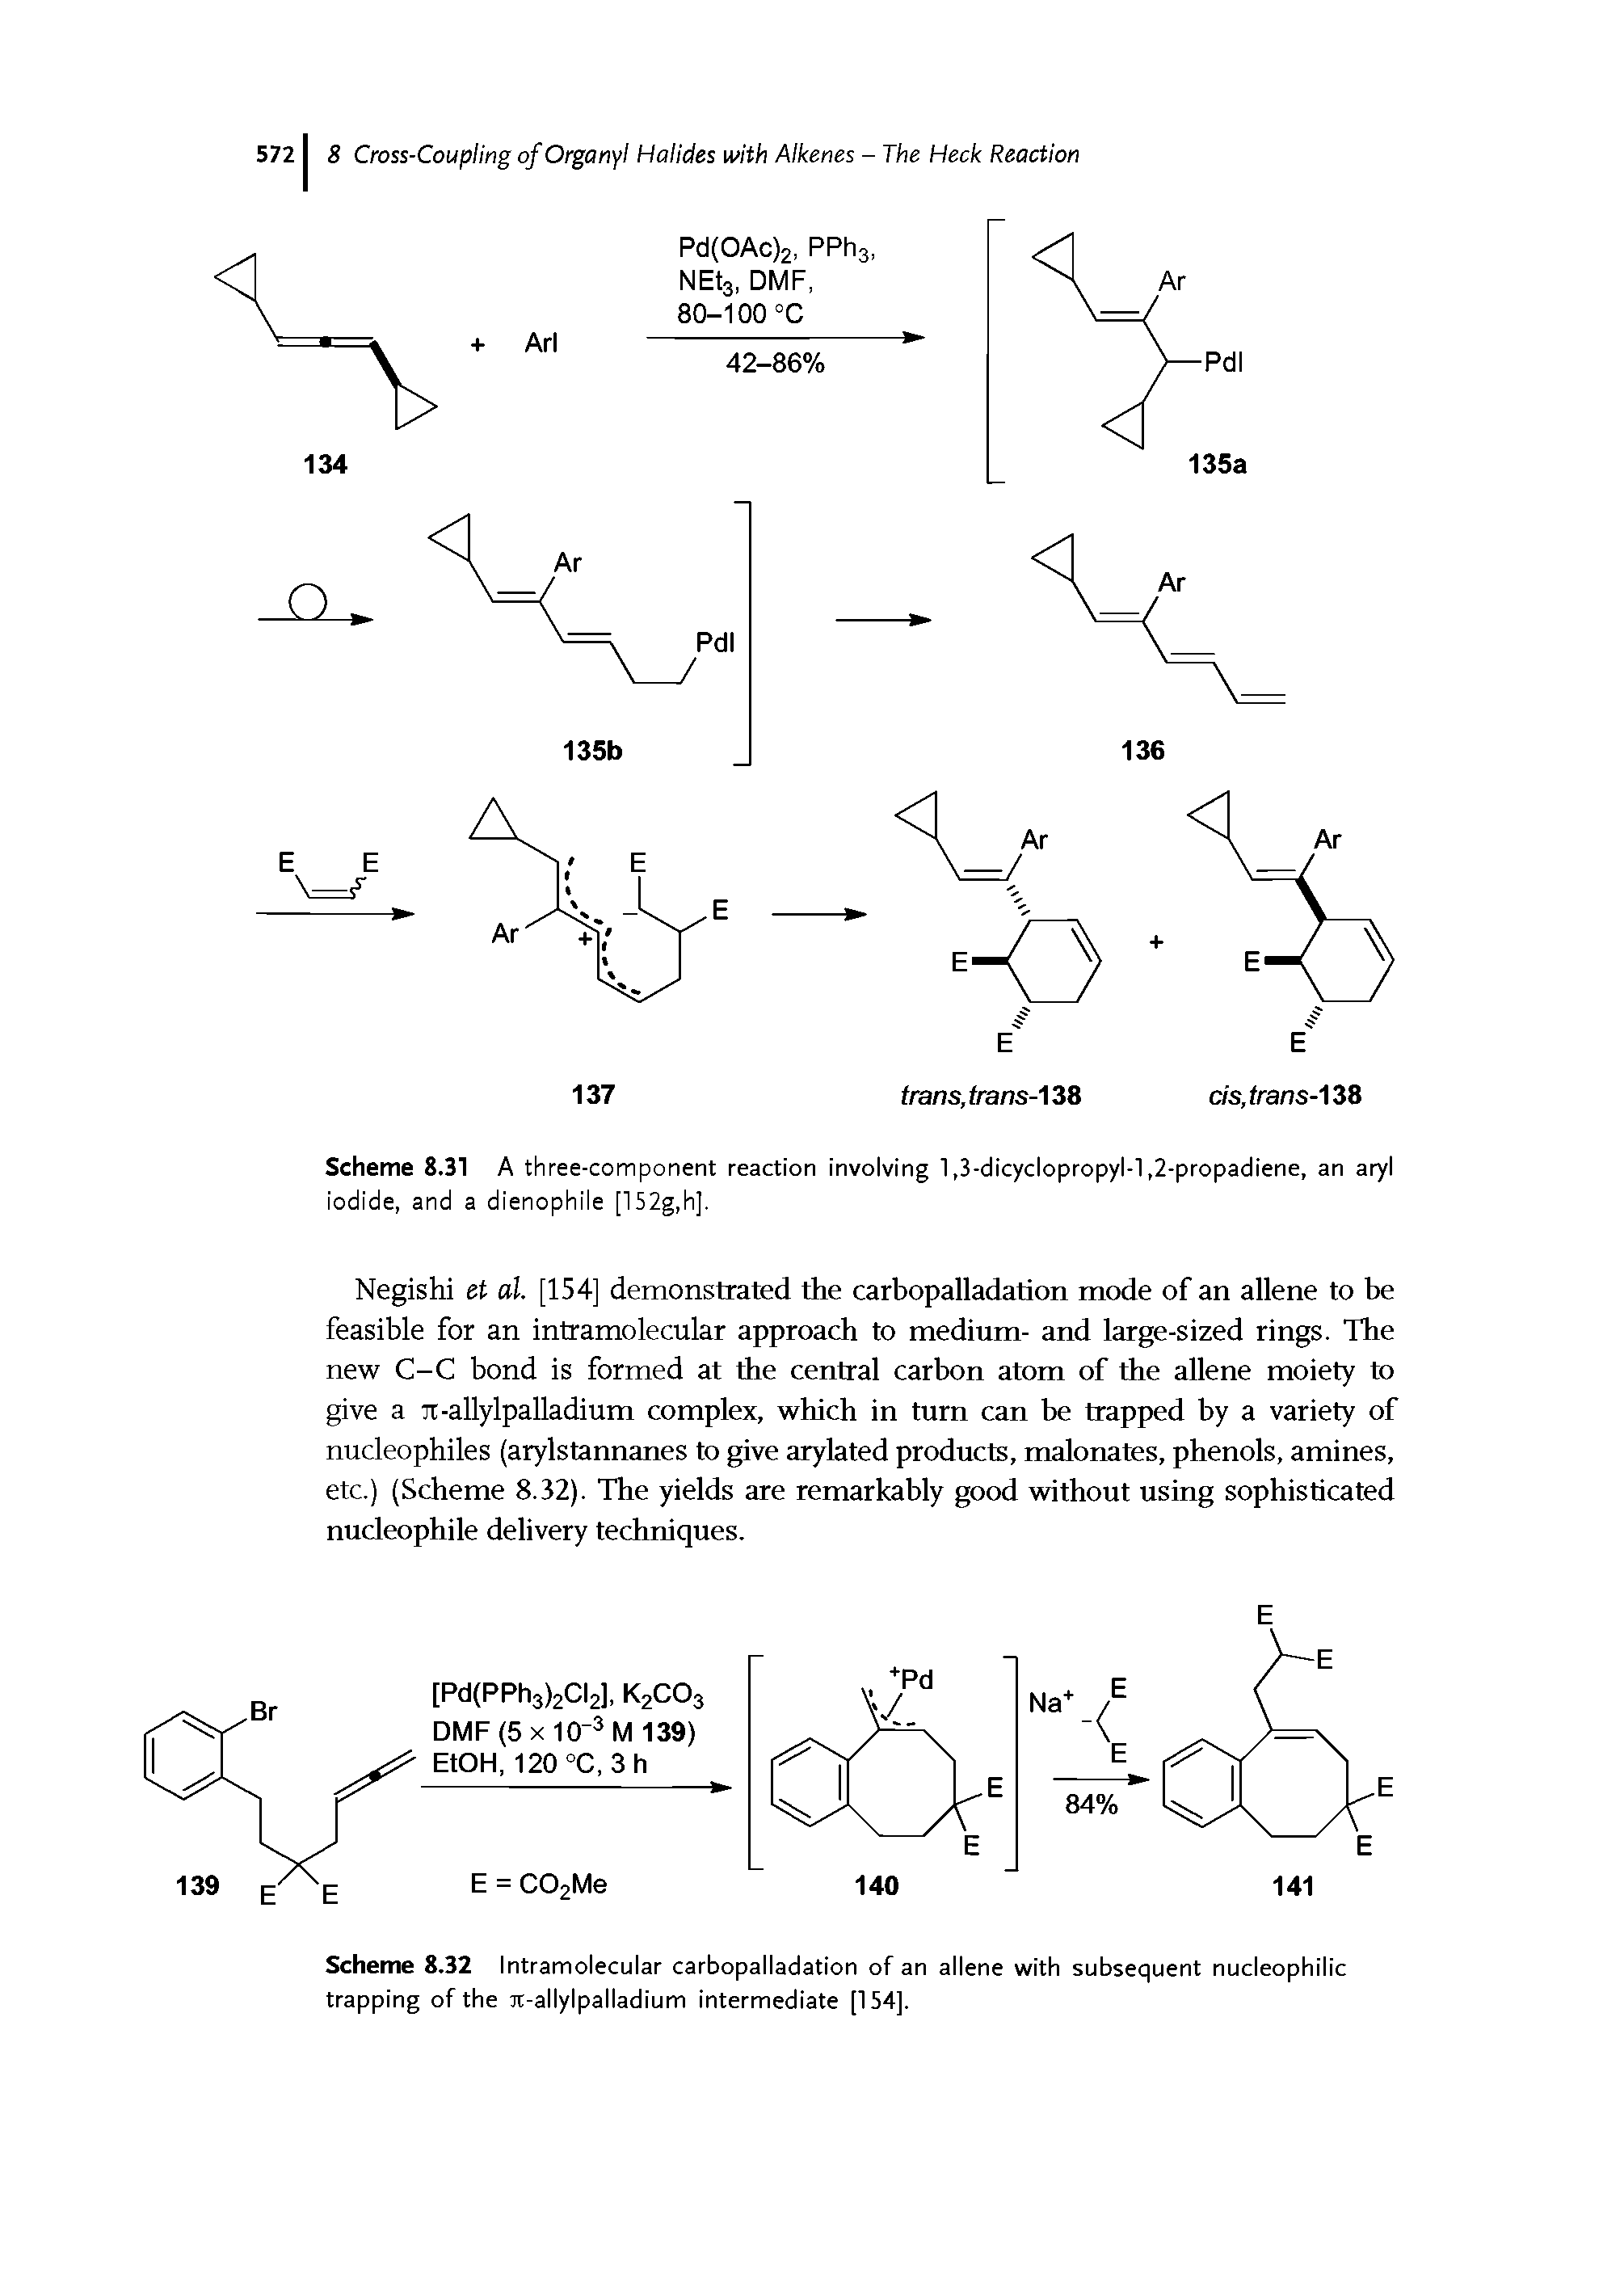 Scheme 8.32 Intramolecular carbopalladation of an allene with subsequent nucleophilic trapping of the it-allylpalladium intermediate [154].